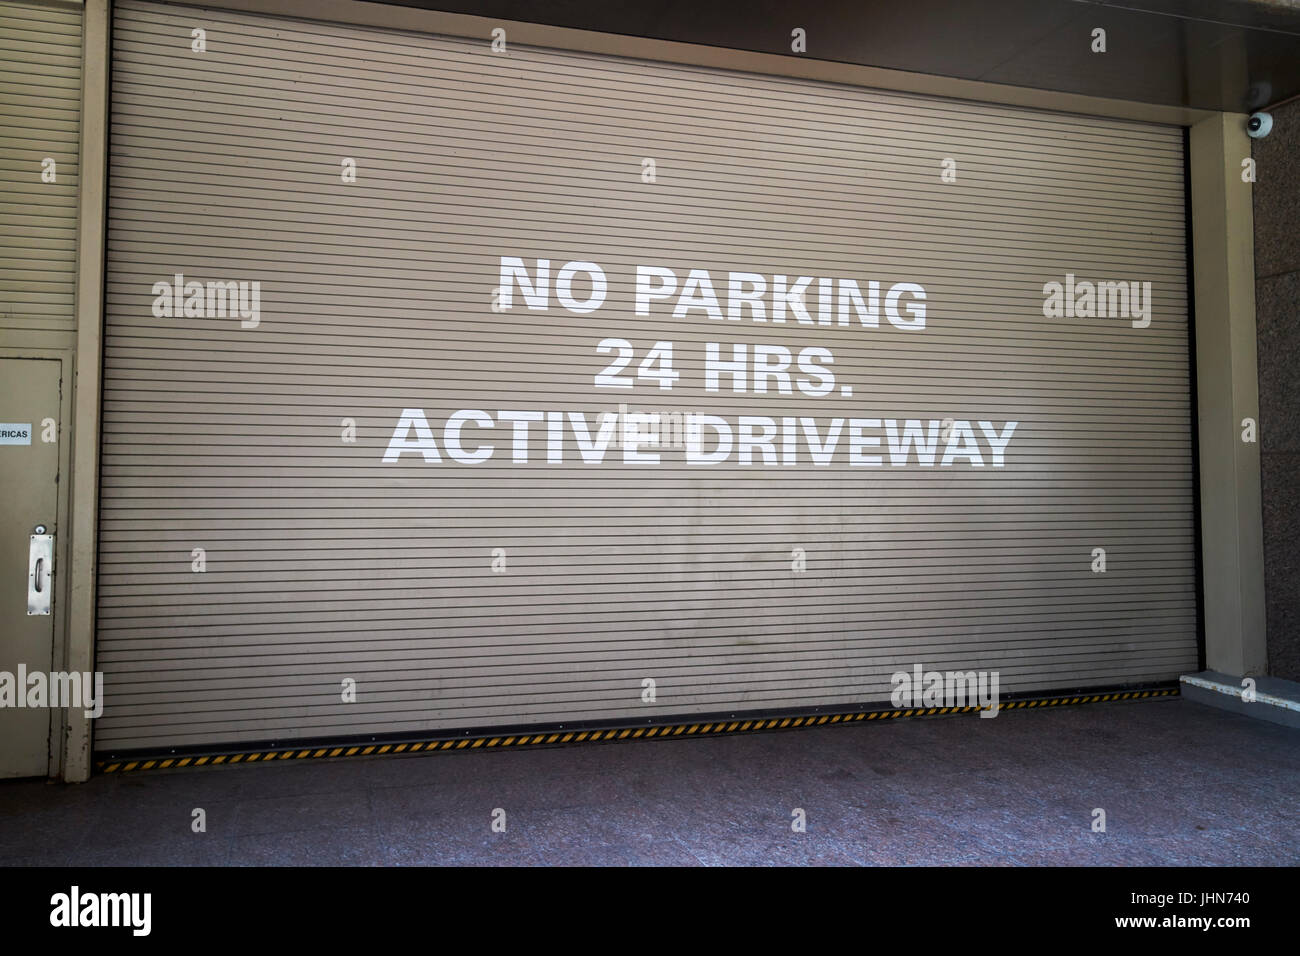 no parking 24 hrs active driveway sign on steel shutter entrance to underground parking midtown New York City USA Stock Photo